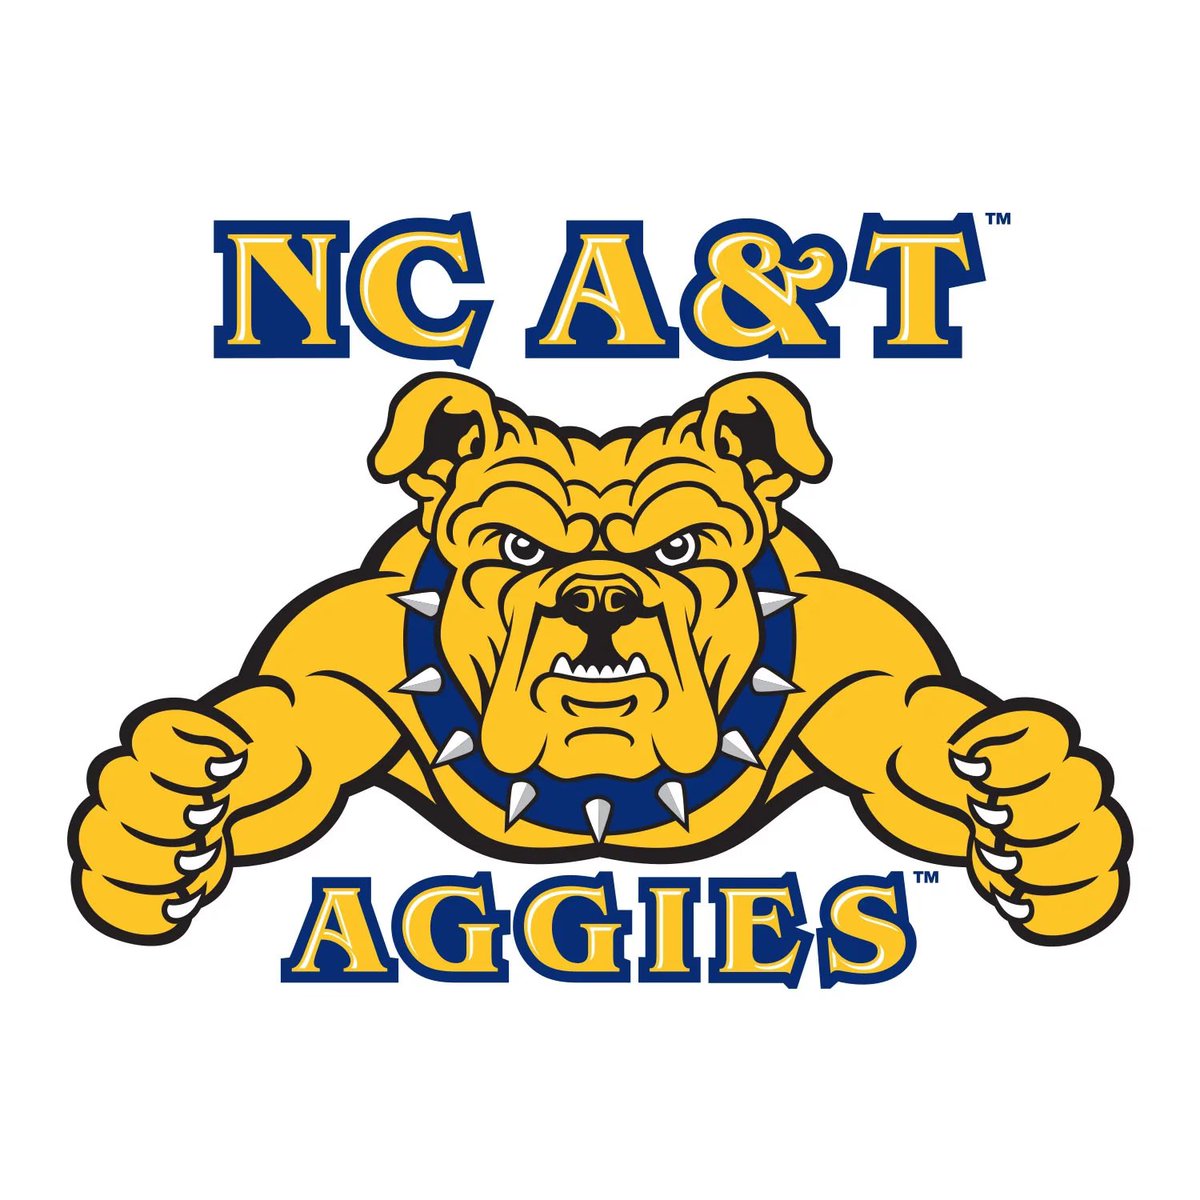 Blessed and honored to receive my First D1 offer from North Carolina A&T

#aggiepride

@FBCoachBankins @Coach_Mattes @NCATFootball 

@GainesvilleFoo1 @CoachBruton @MDuda57 @BigBrown90 @C_ROCK53